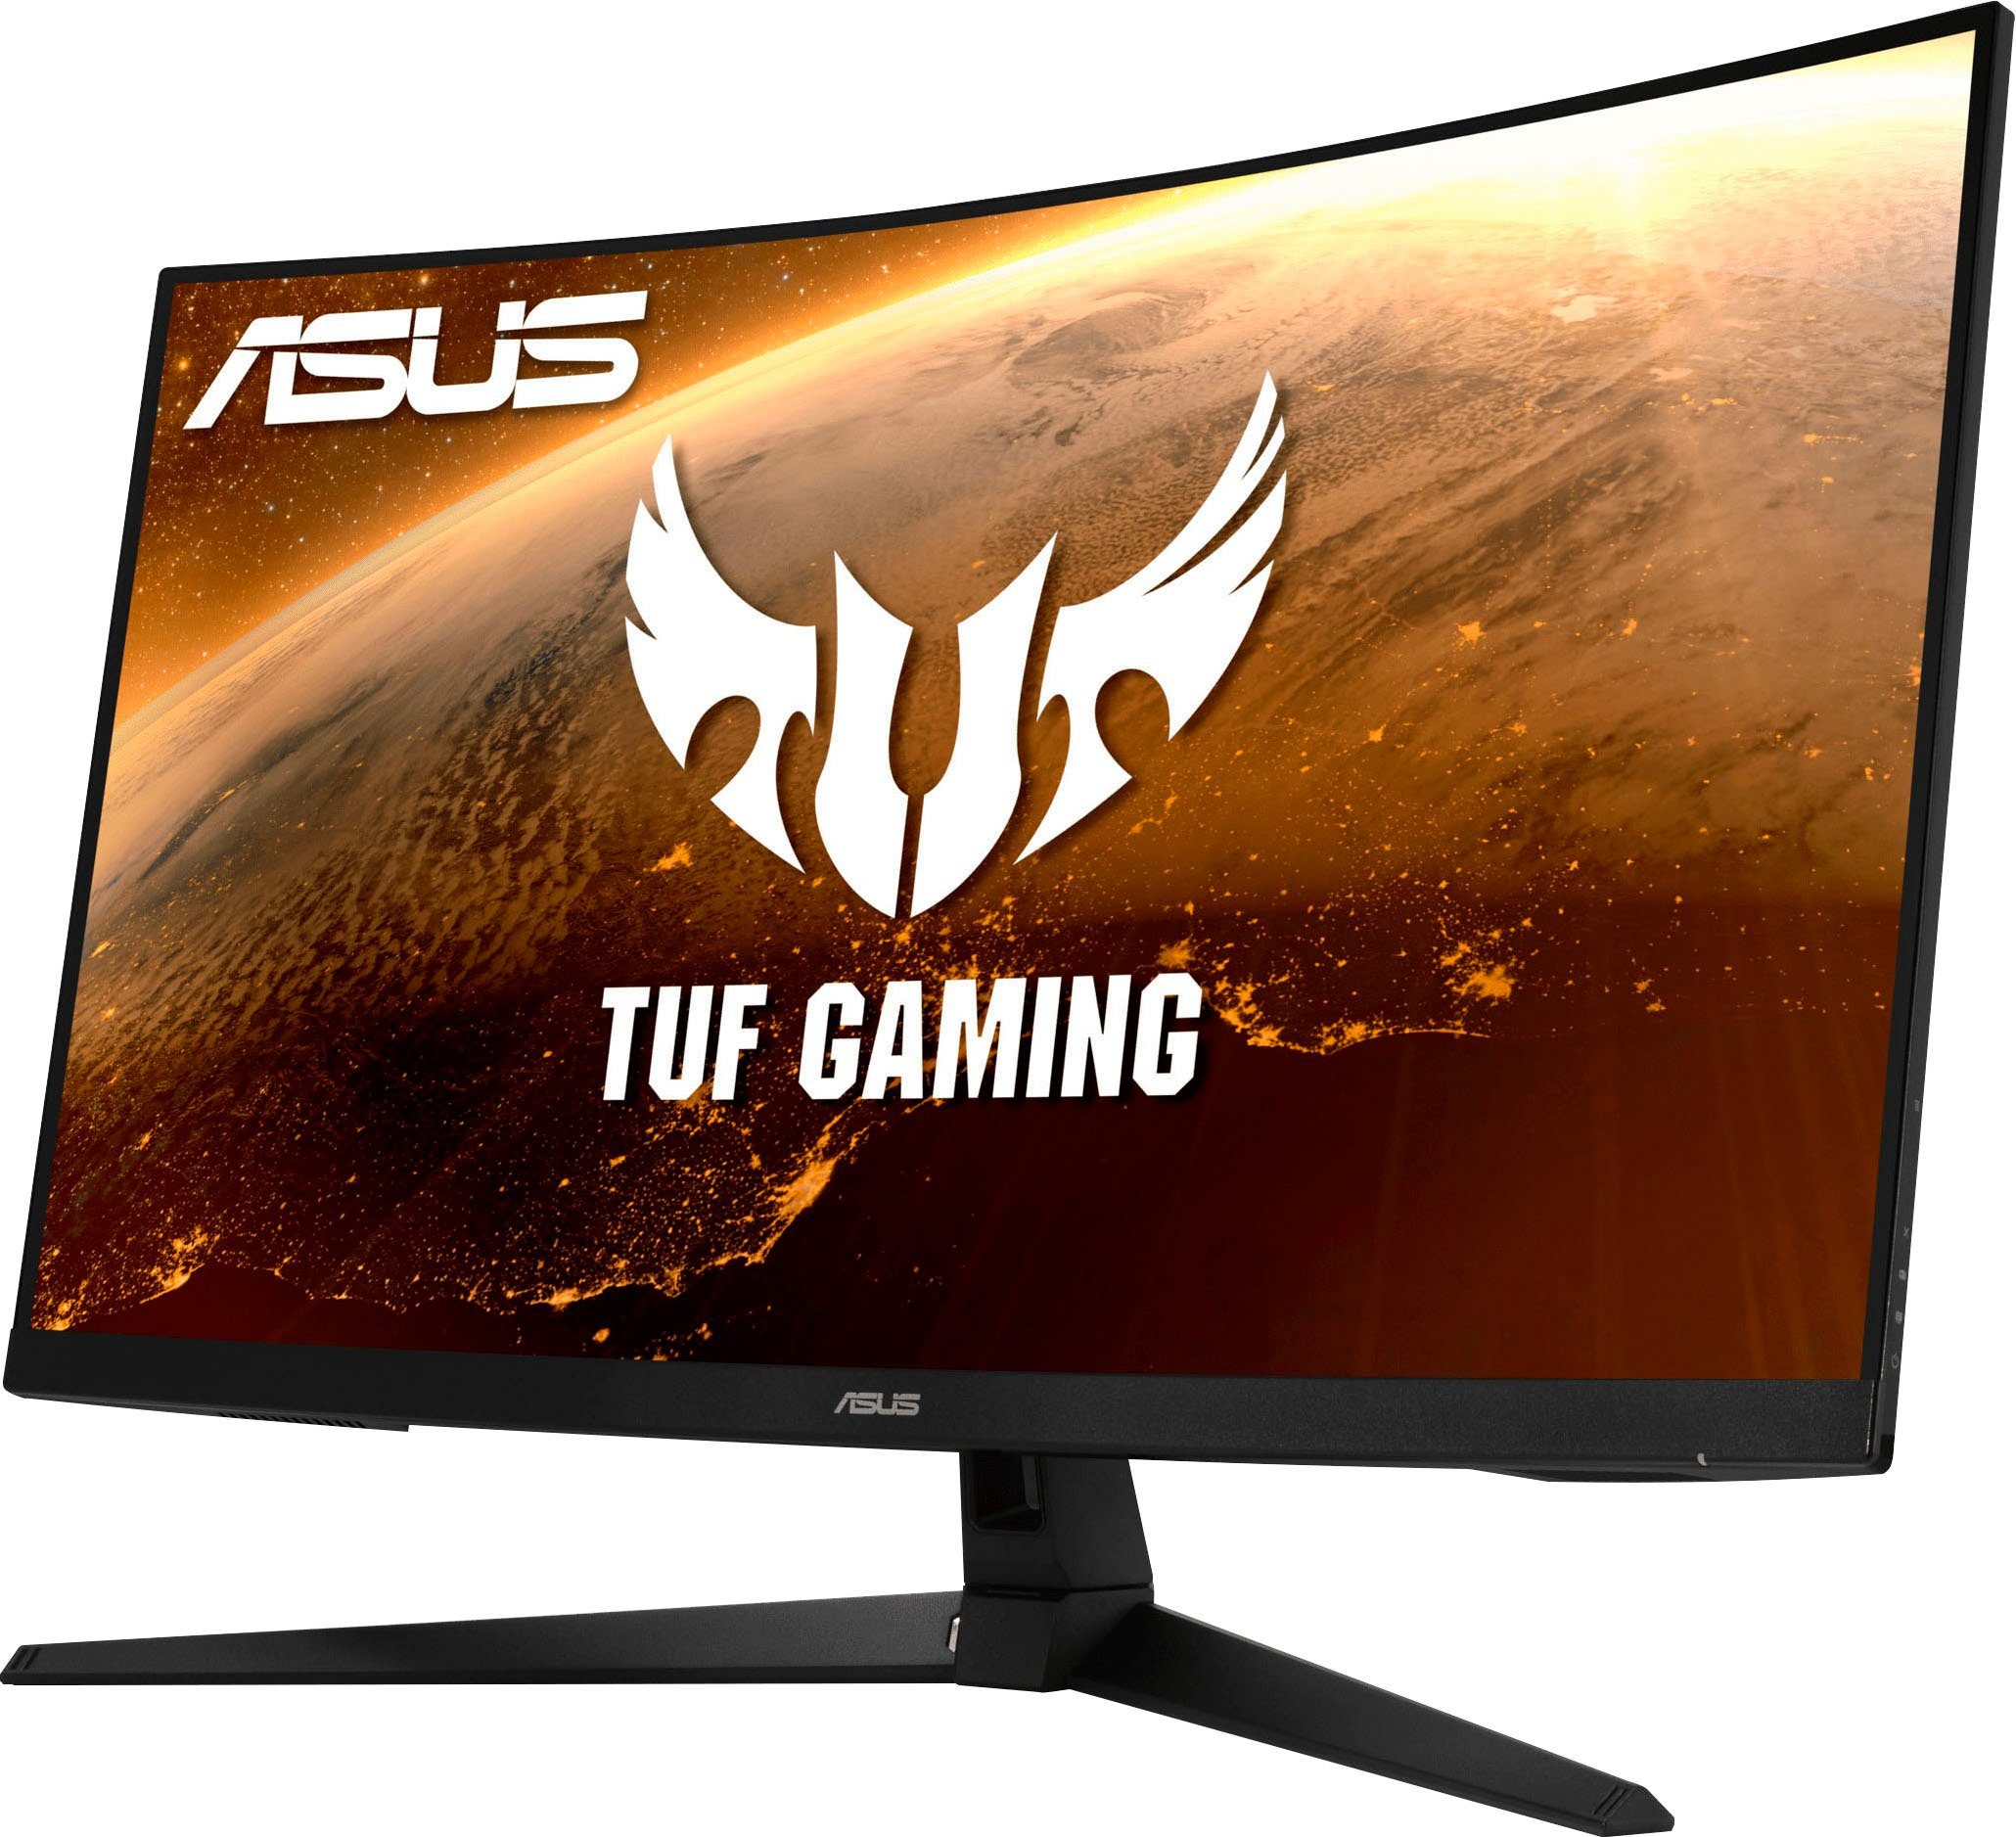 Reaktionszeit, LED) x 165 ms Curved-Gaming-Monitor 1 Hz, 1440 cm/31,5 QHD, VG32VQ1BR ", (80 2560 px, Asus